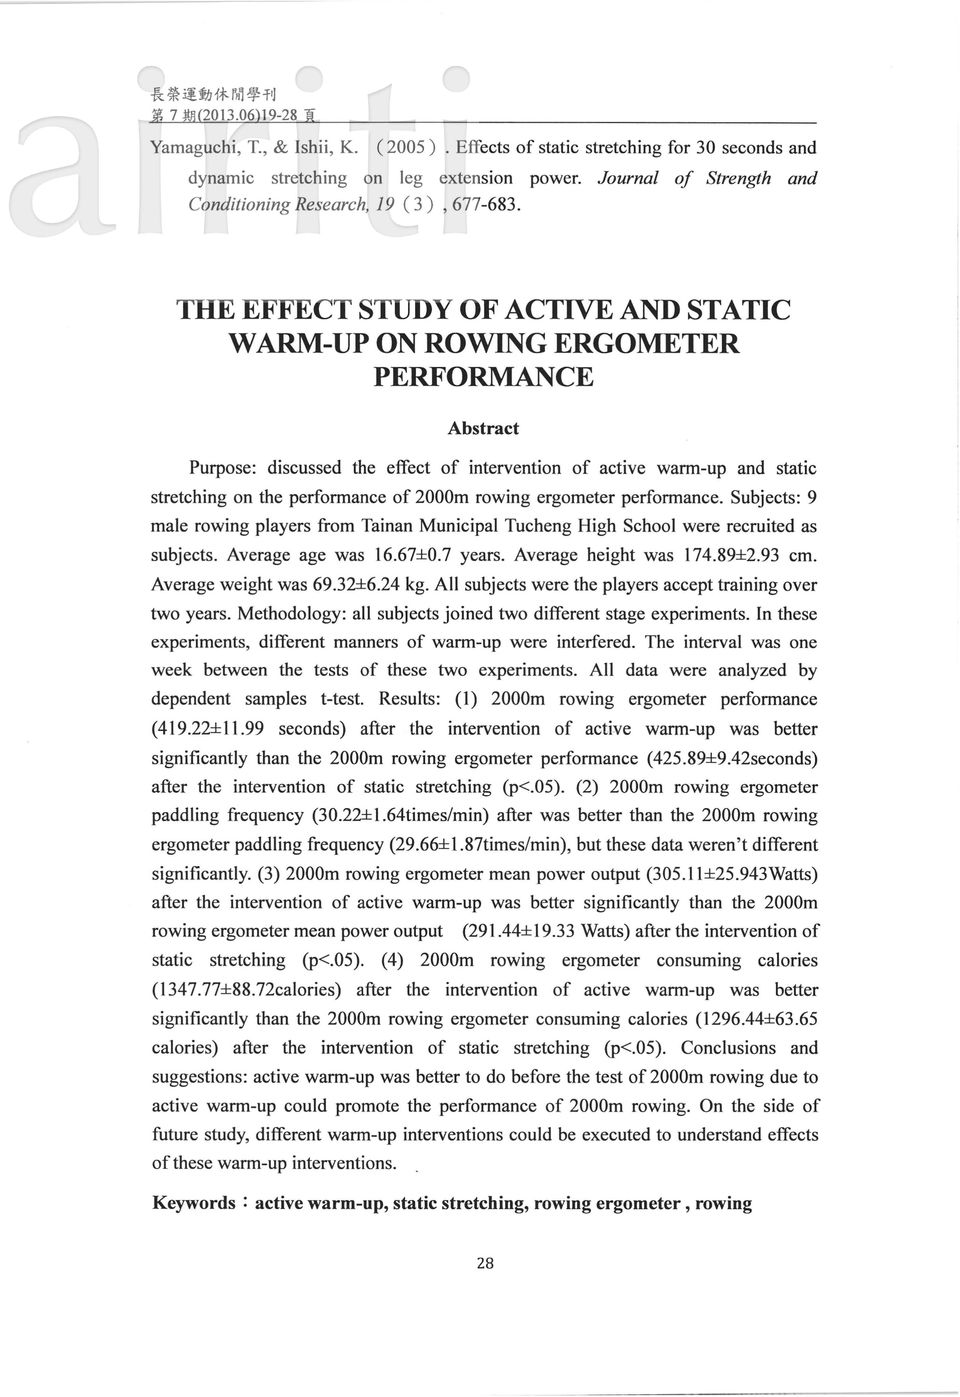 THE EFFECT STUDY OF ACTIVE AND STATIC W ARM-UP ON ROWING ERGOMETER PERFORMANCE Purpose: discussed the e 缸 ect Abstract of intervention of active wann-up and static stretching on the perfonnance of